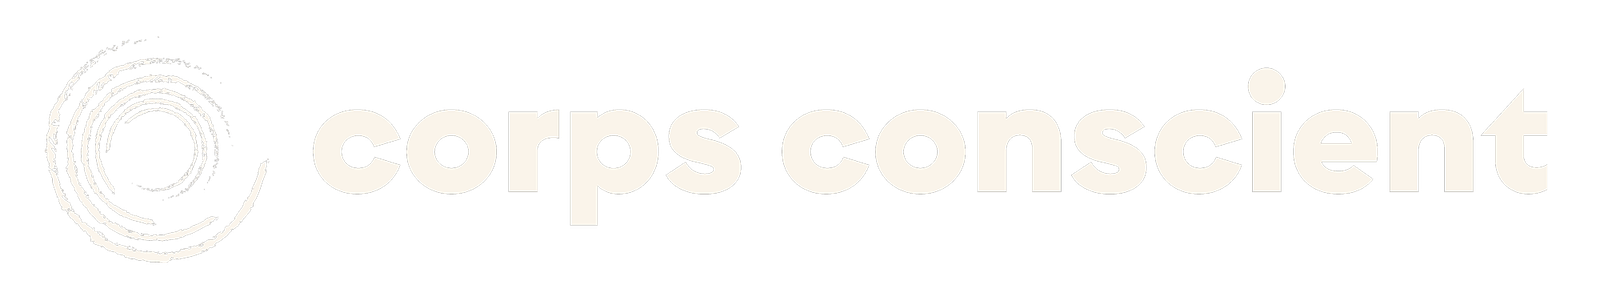 logo-corps-conscient-footer